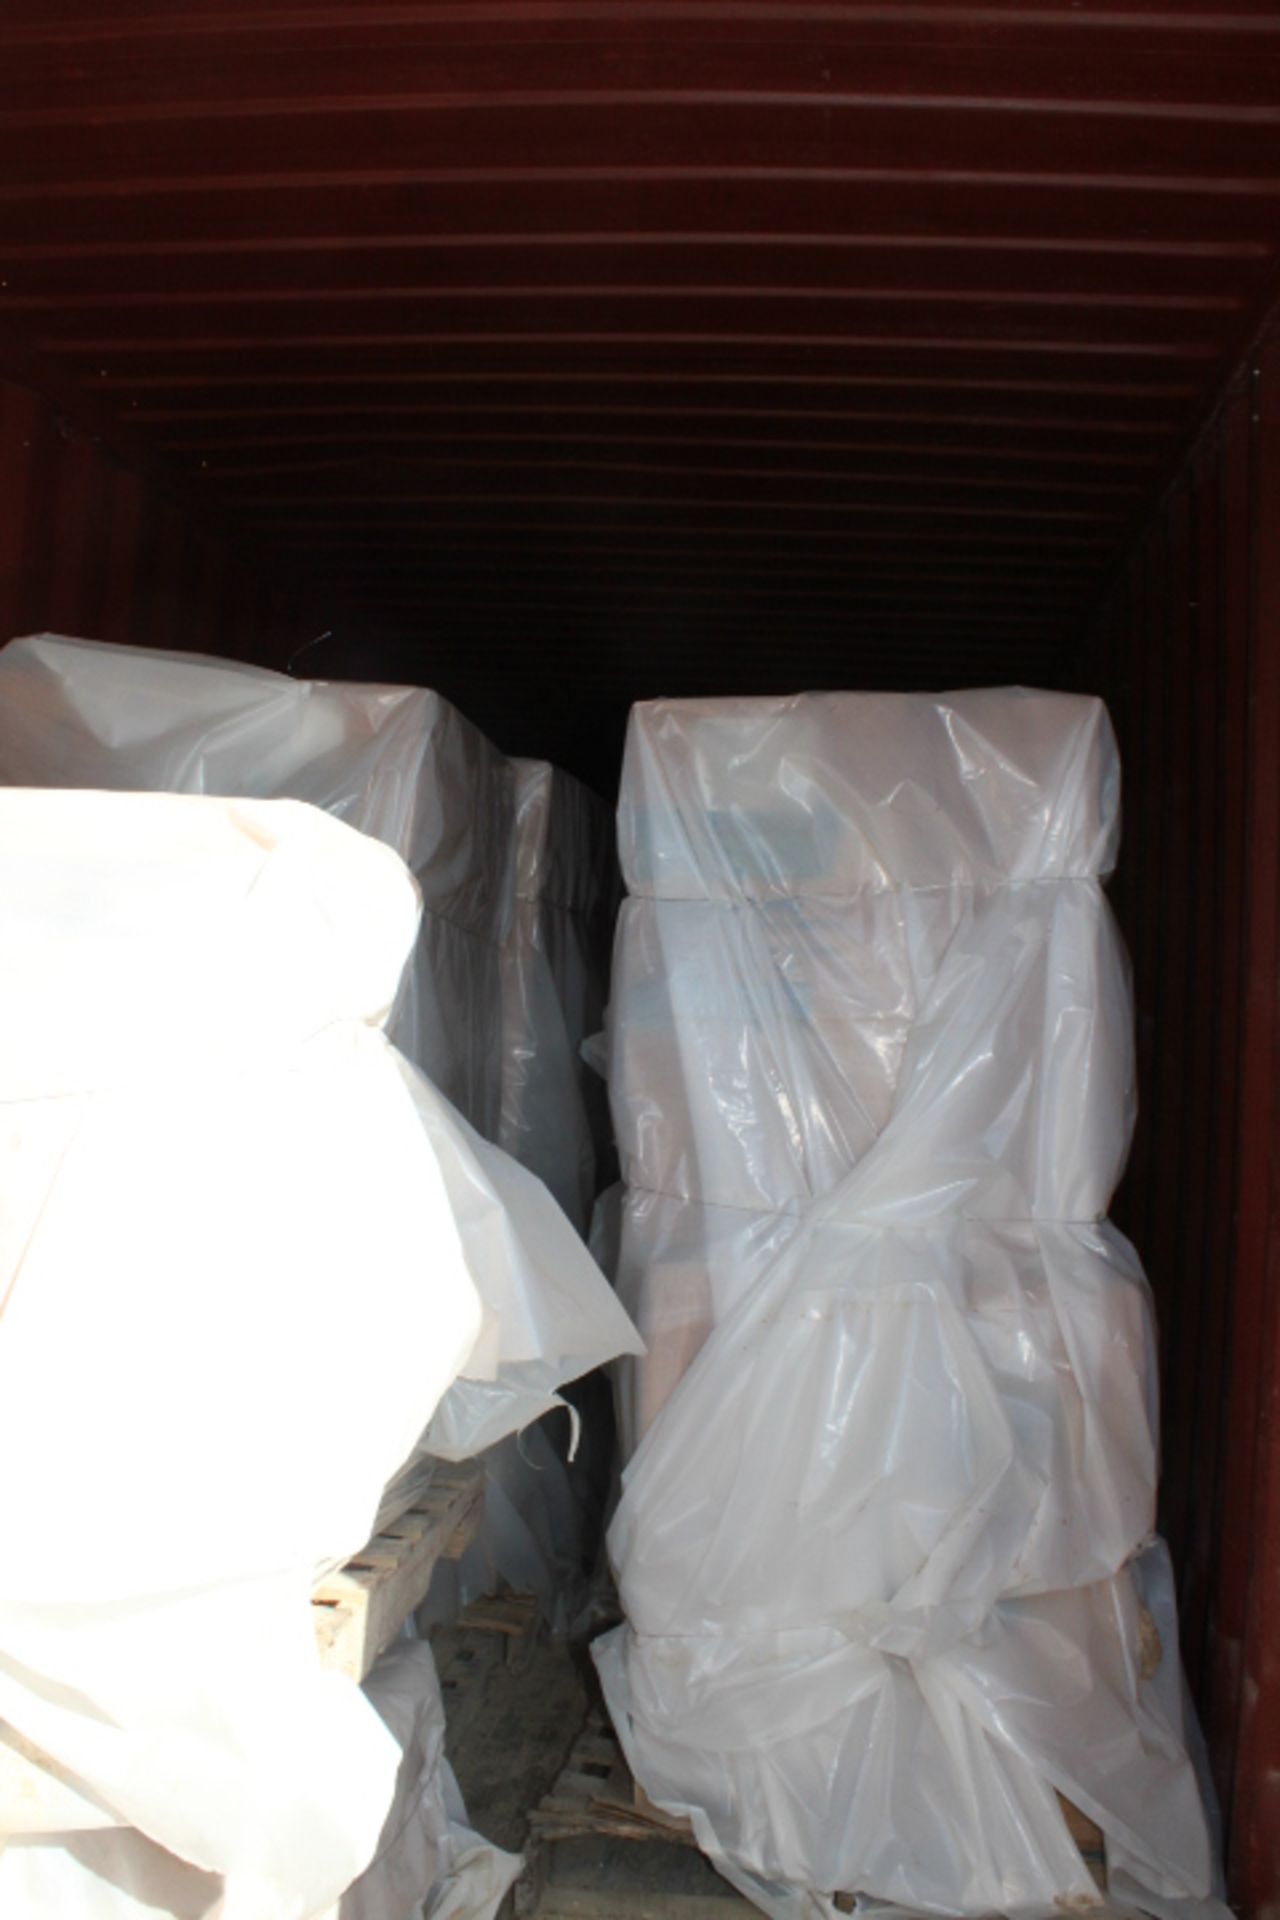 LOT CONTENTS OF CONTAINER 4: refractory insulation (4 boxes on approx. 11 pallets) & 300" x 24" x 1"